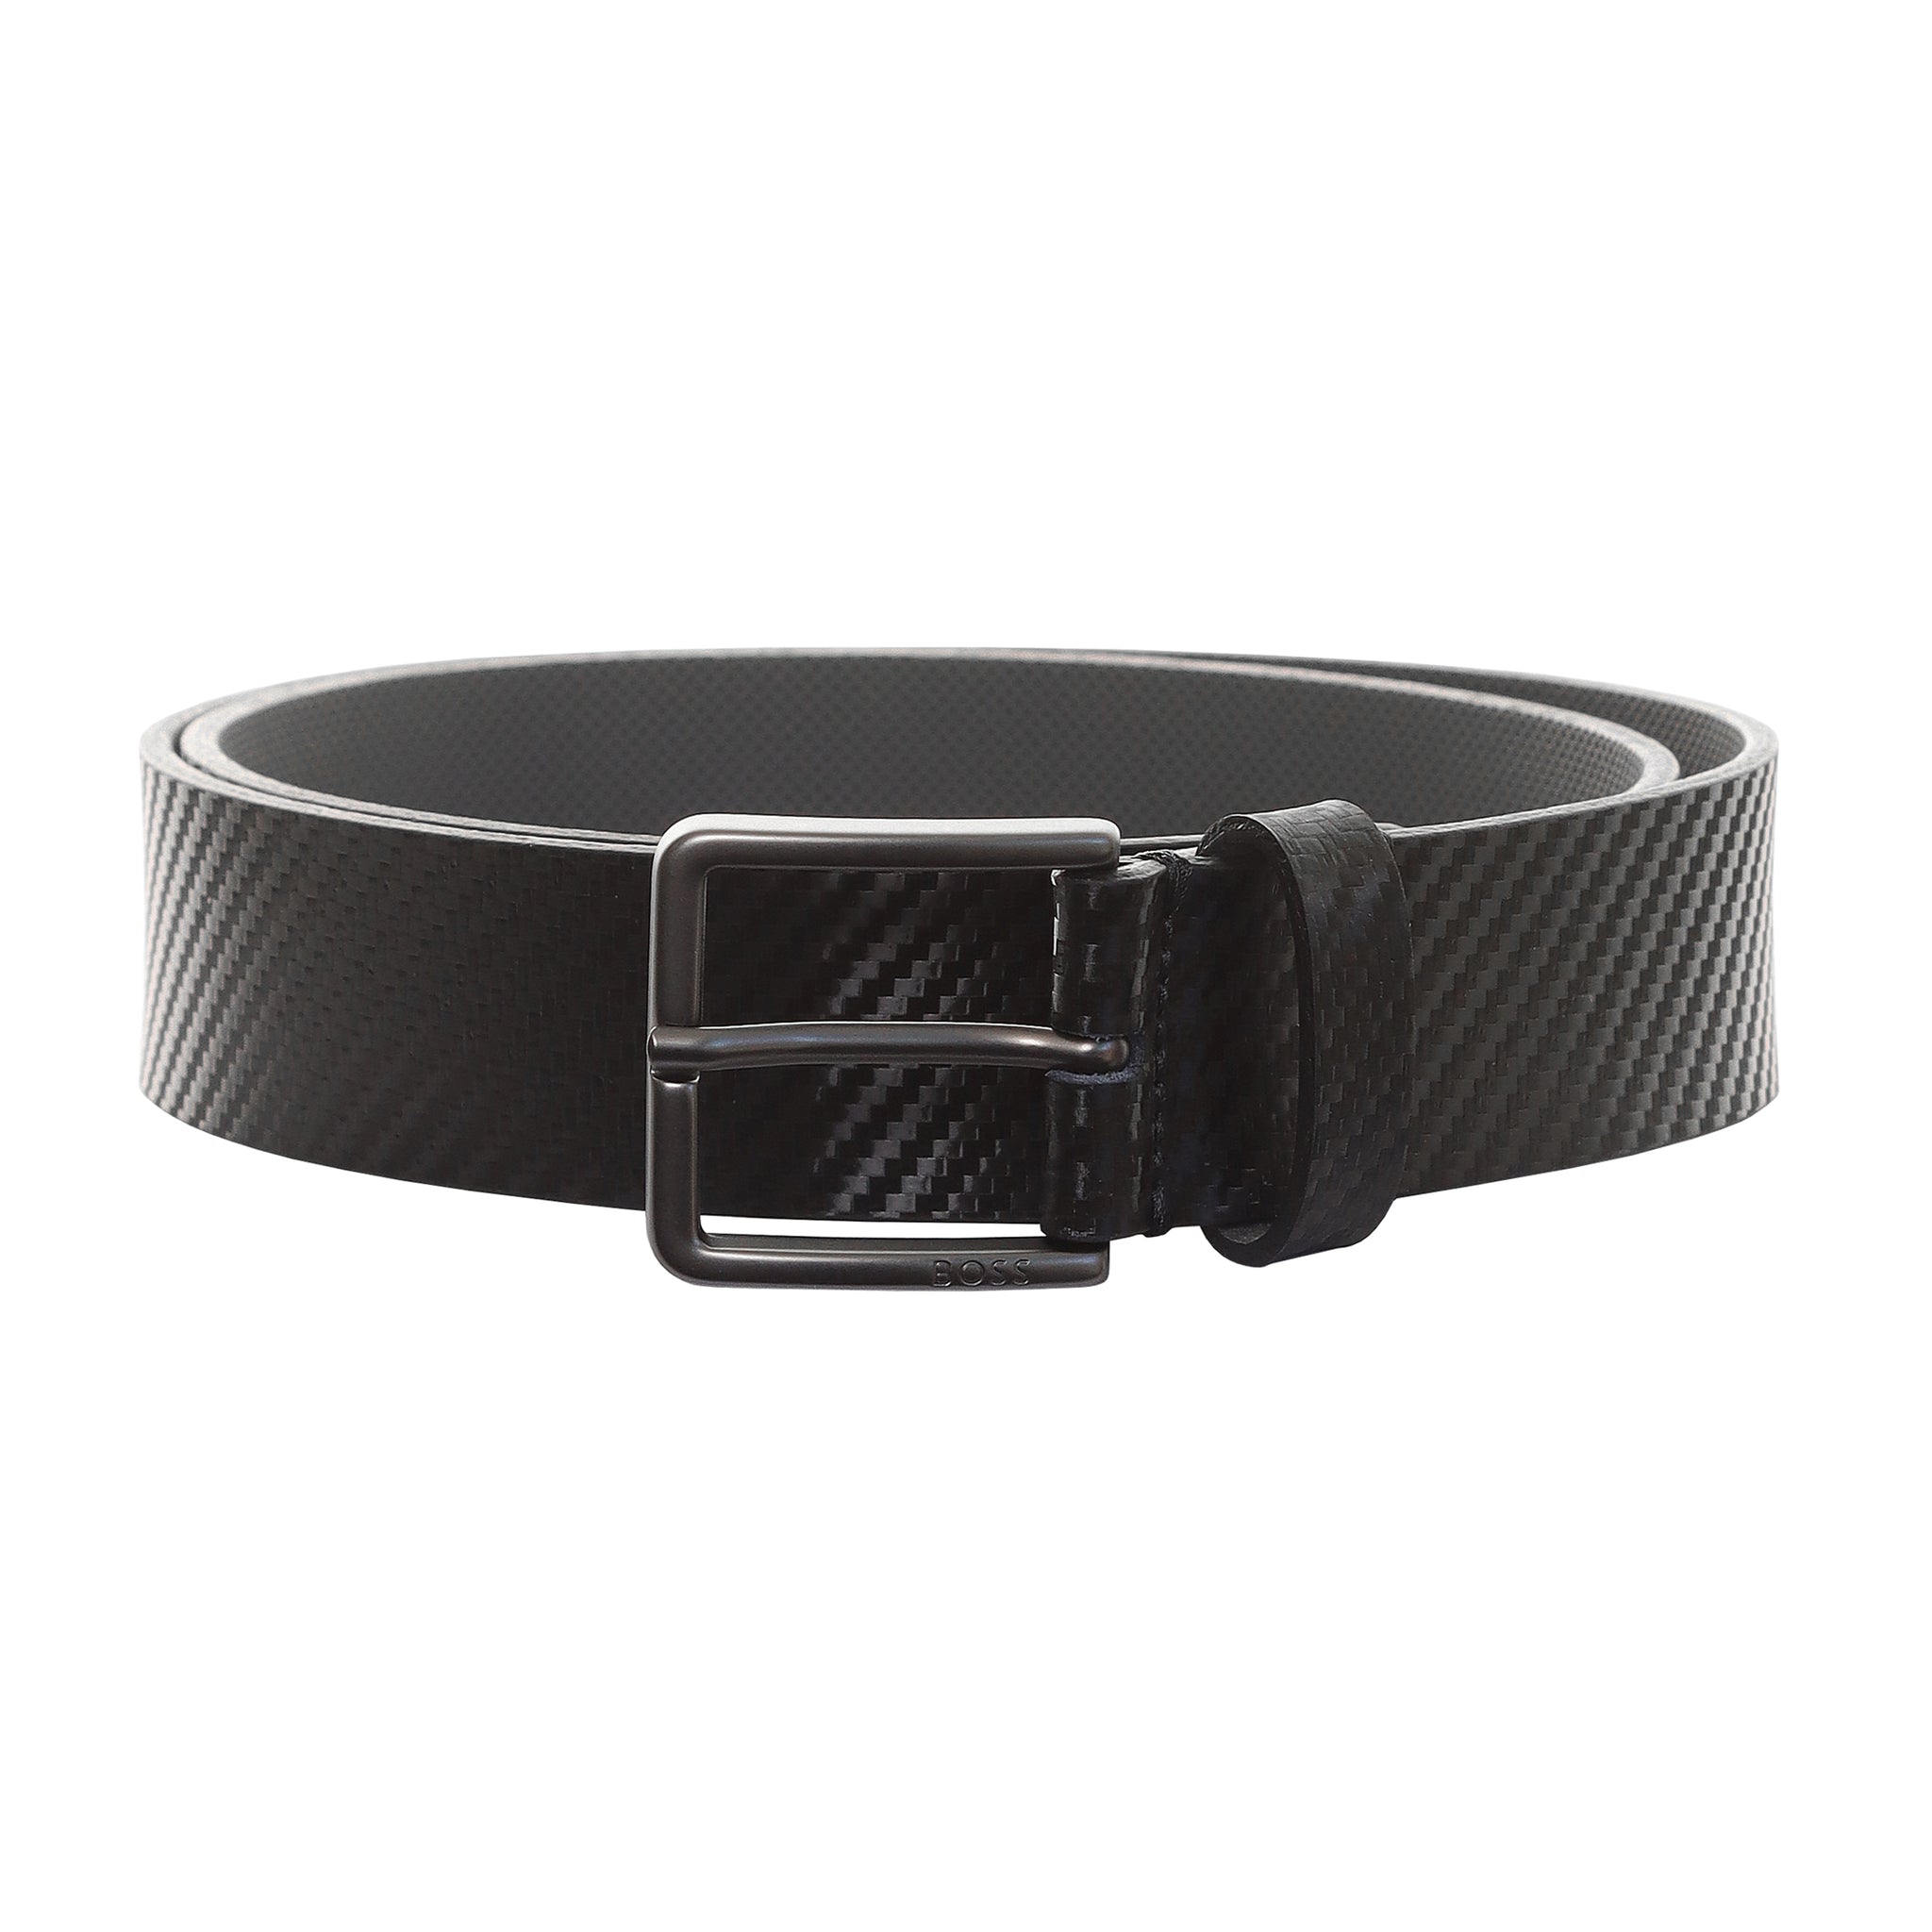 BOSS Ther-Carbon Golf Belt 50481039 Black 001 | Function 18 & Function18